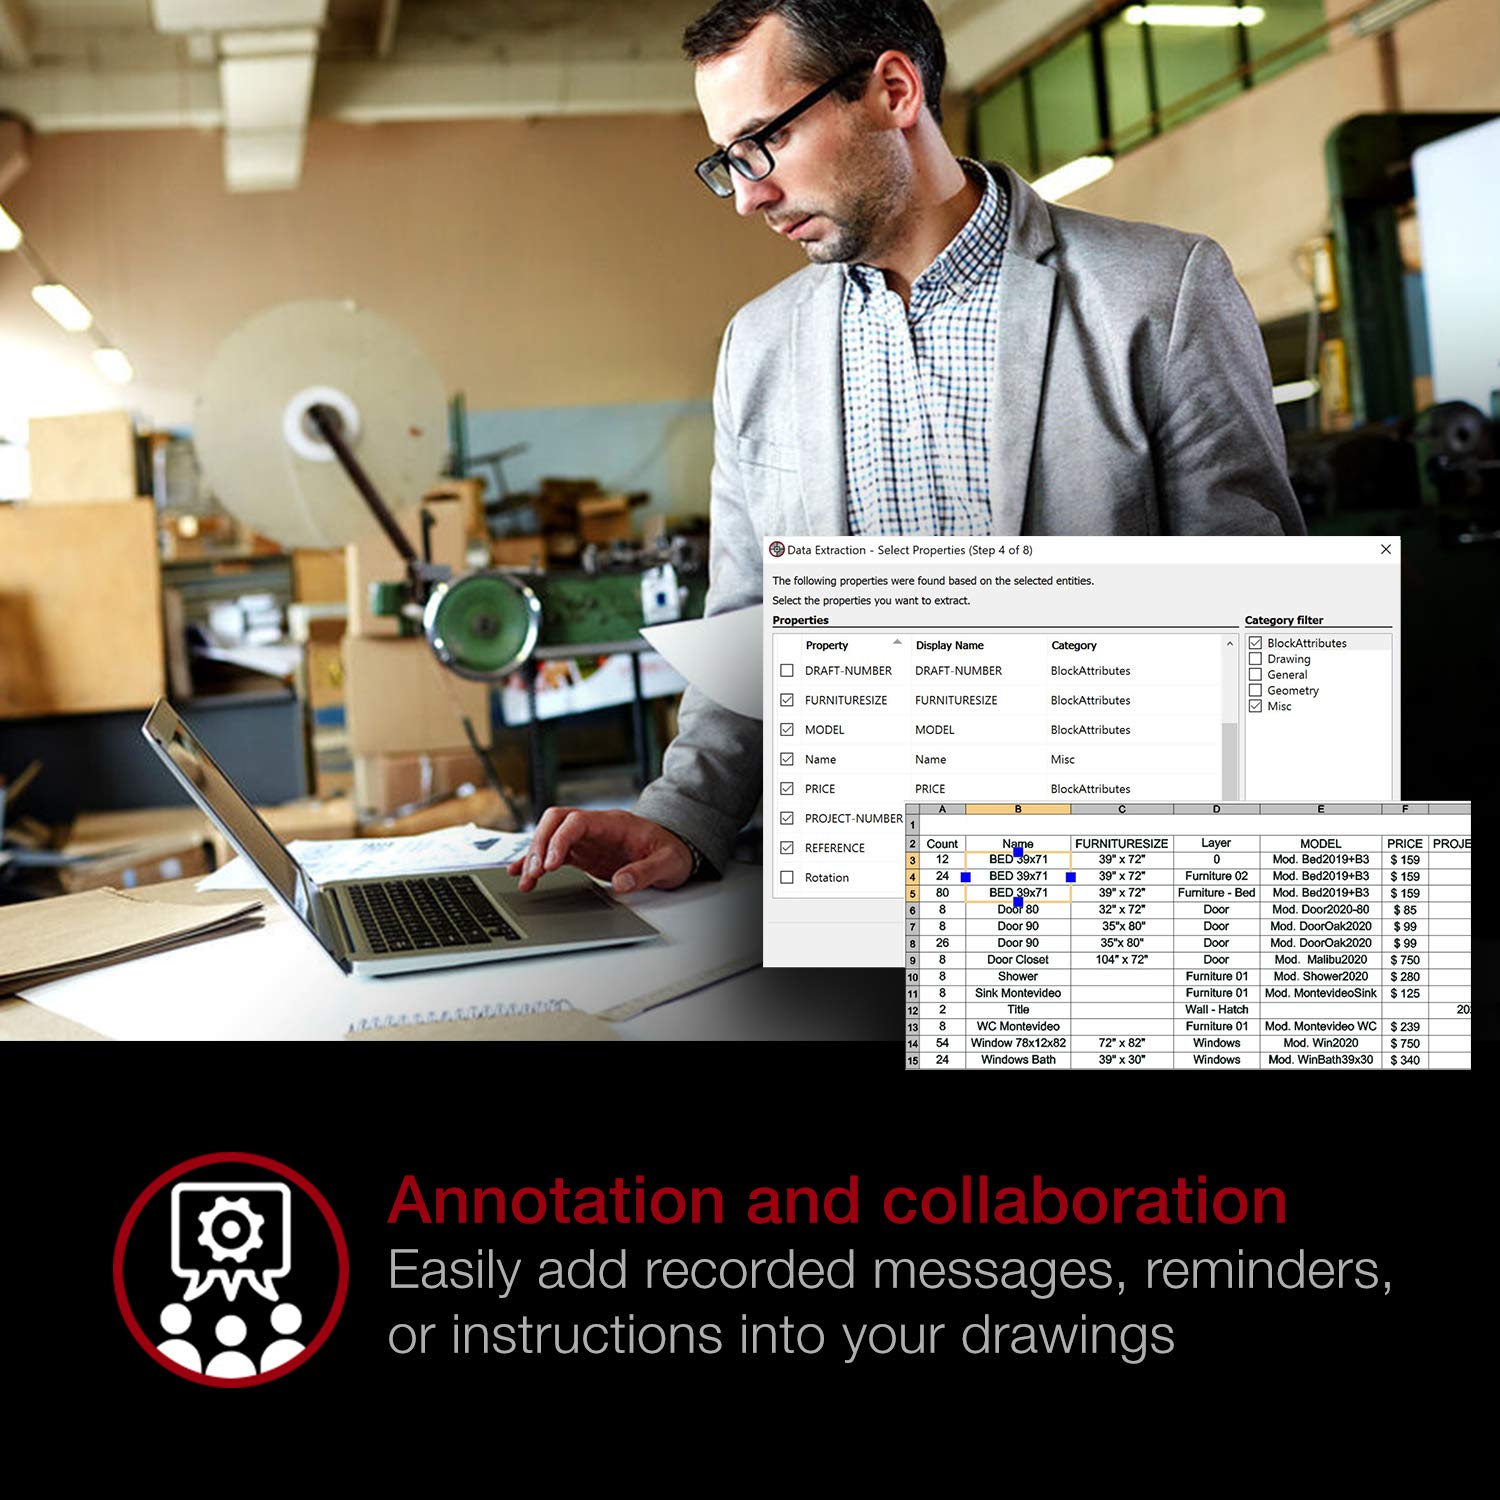 CorelCAD 2021 Education Edition | CAD Software| 2D Drafting, 3D Design & 3D Printing [PC/Mac Disc] [Old Version]